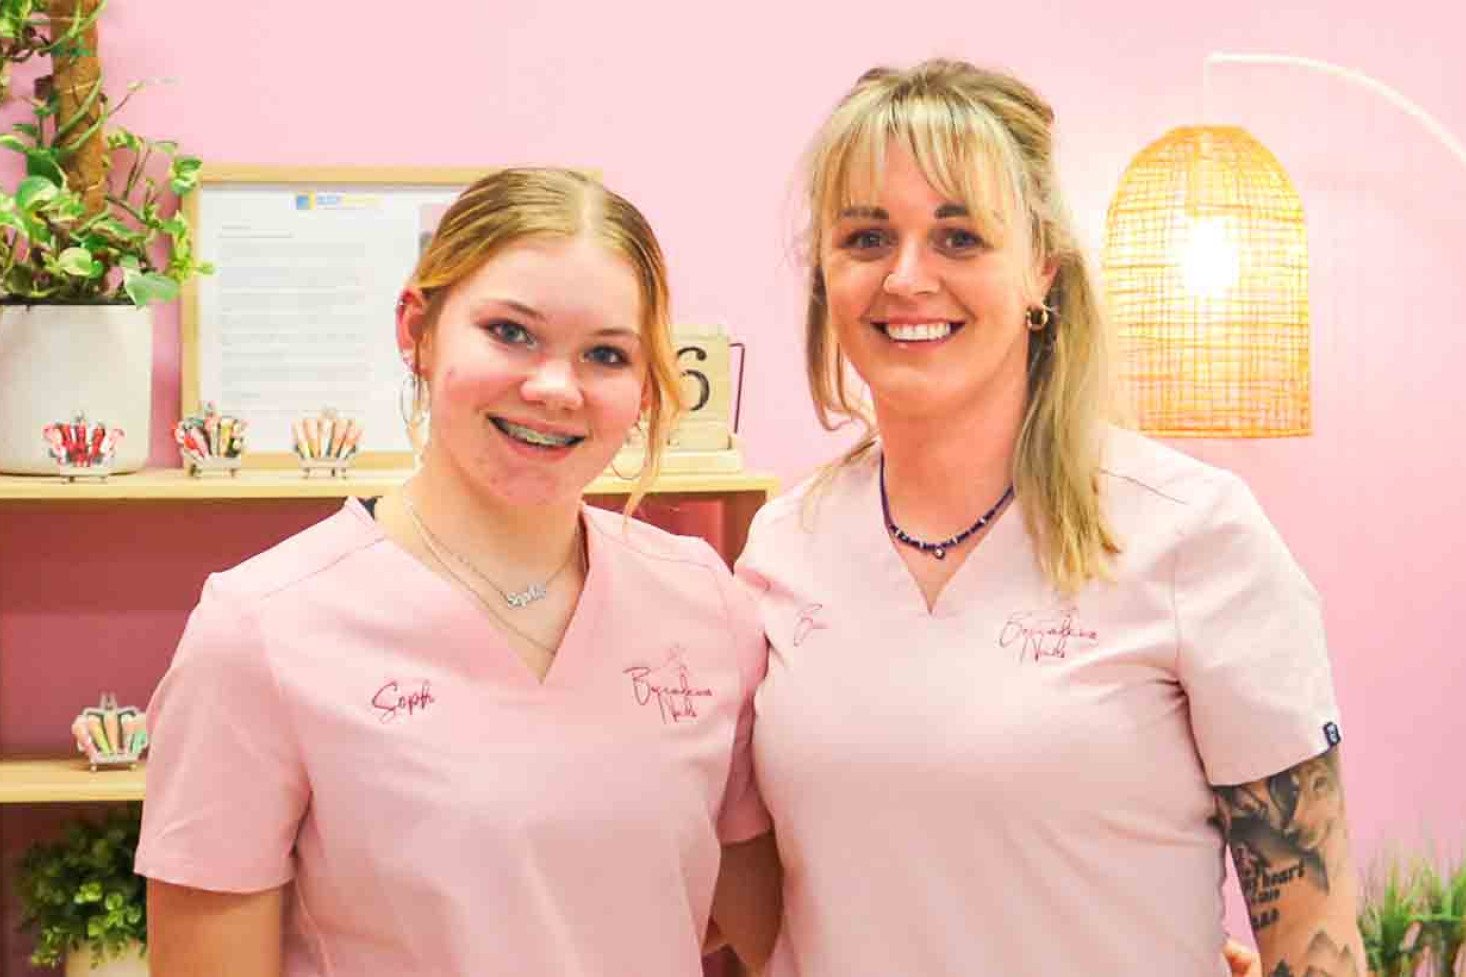 Bec Clarke, proprietor of Beccalicious Nails, with her new staff member, junior technician in training, Sophie Heinemann.